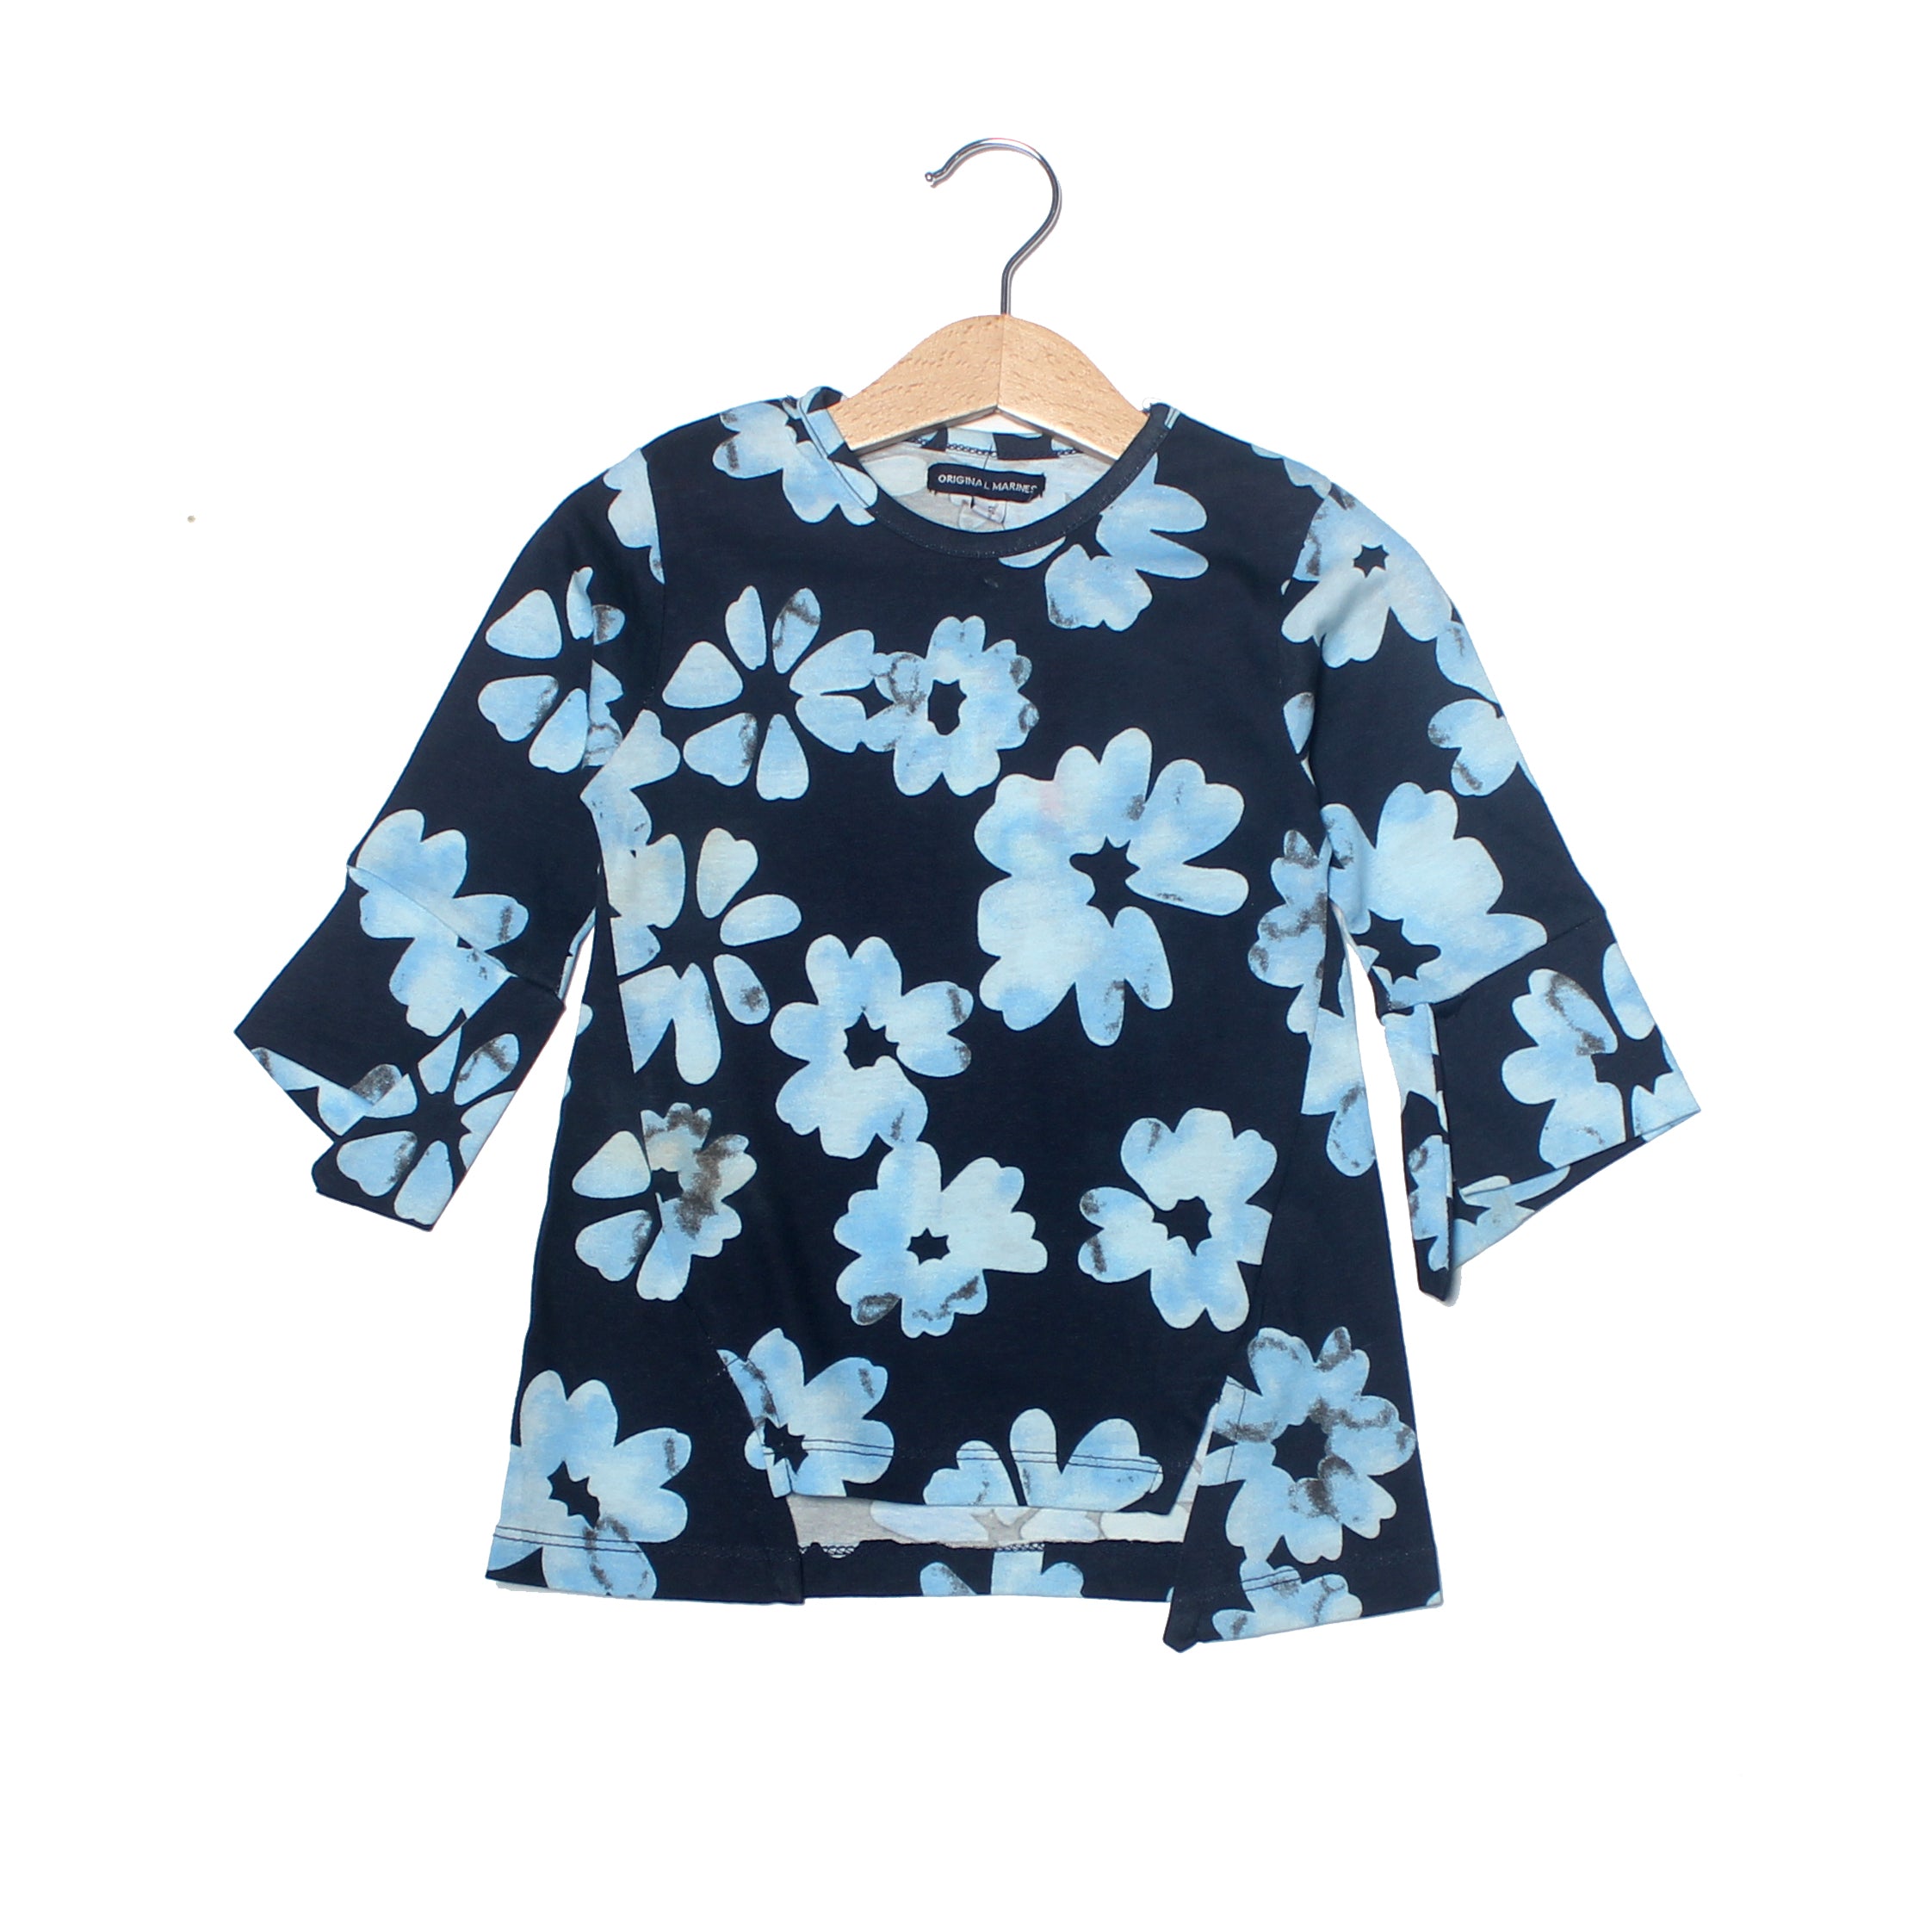 Navy Blue with Light Blue Flowes Printed Full Sleeves T-shirt for Girls